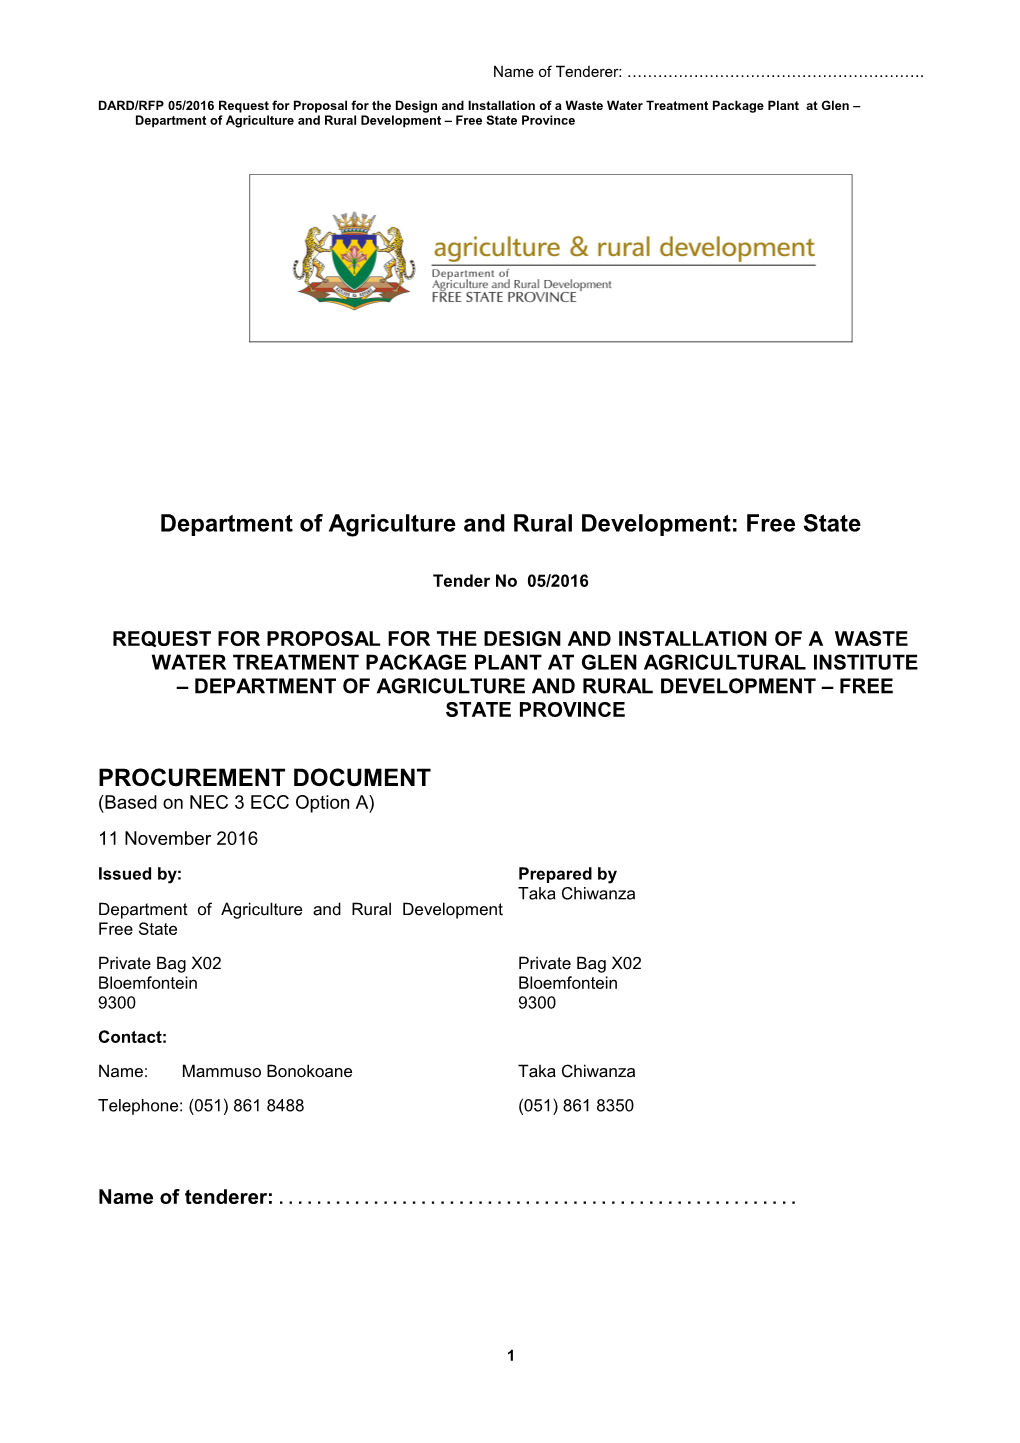 Department of Agriculture and Rural Development: Free State